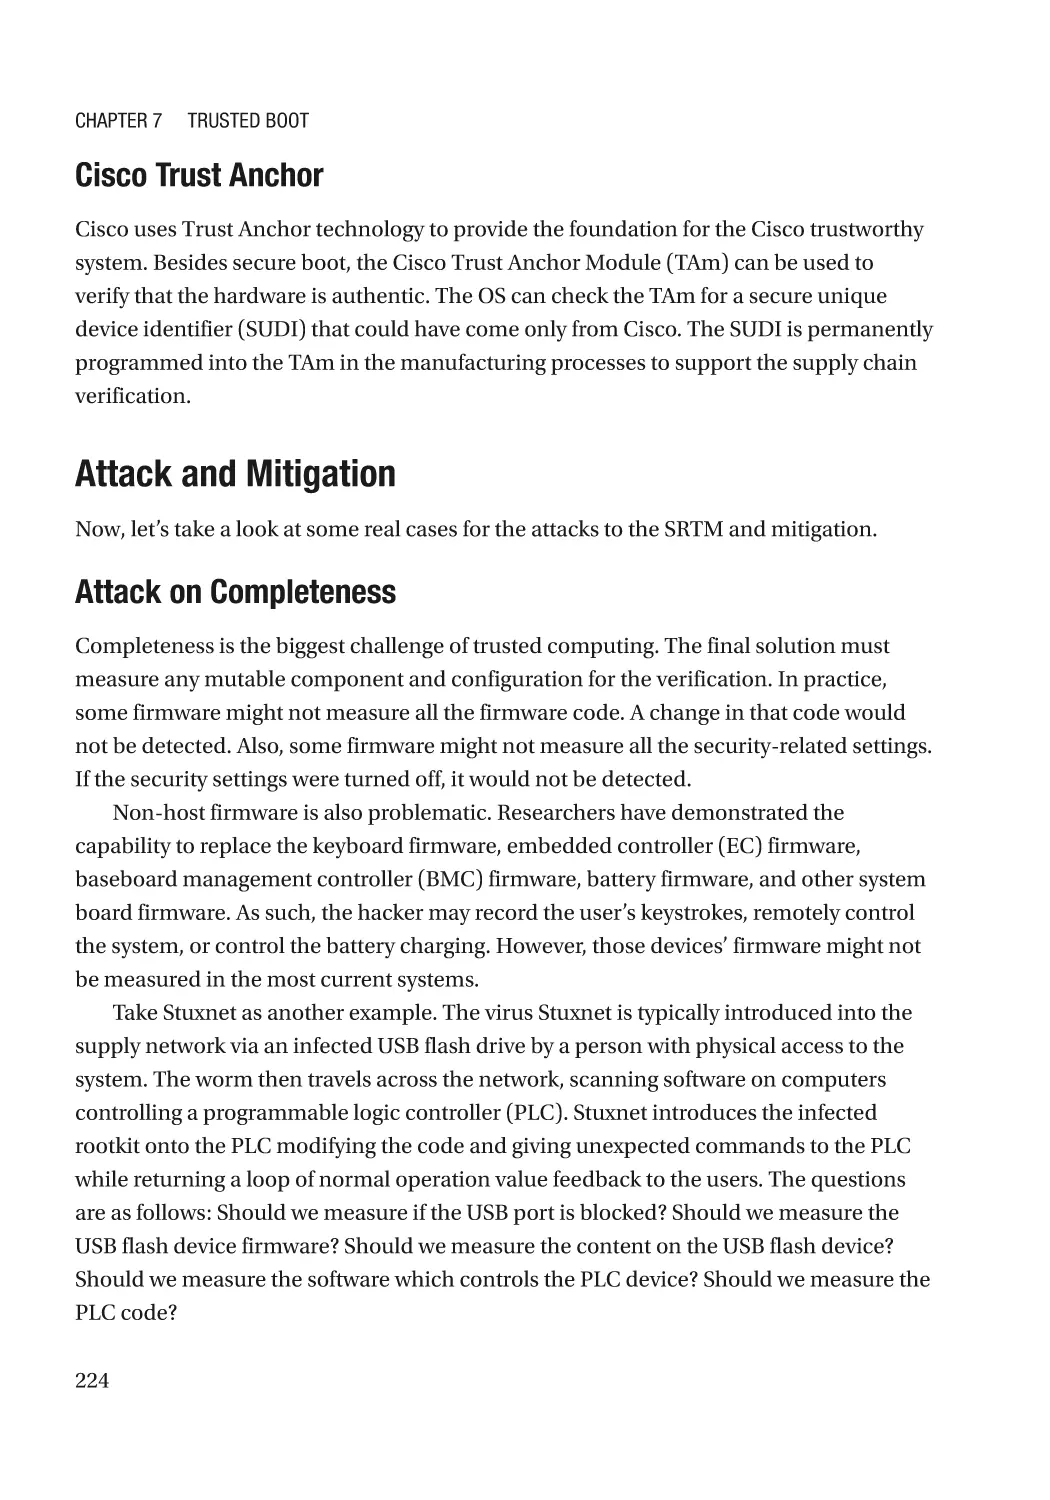 Cisco Trust Anchor
Attack and Mitigation
Attack on Completeness